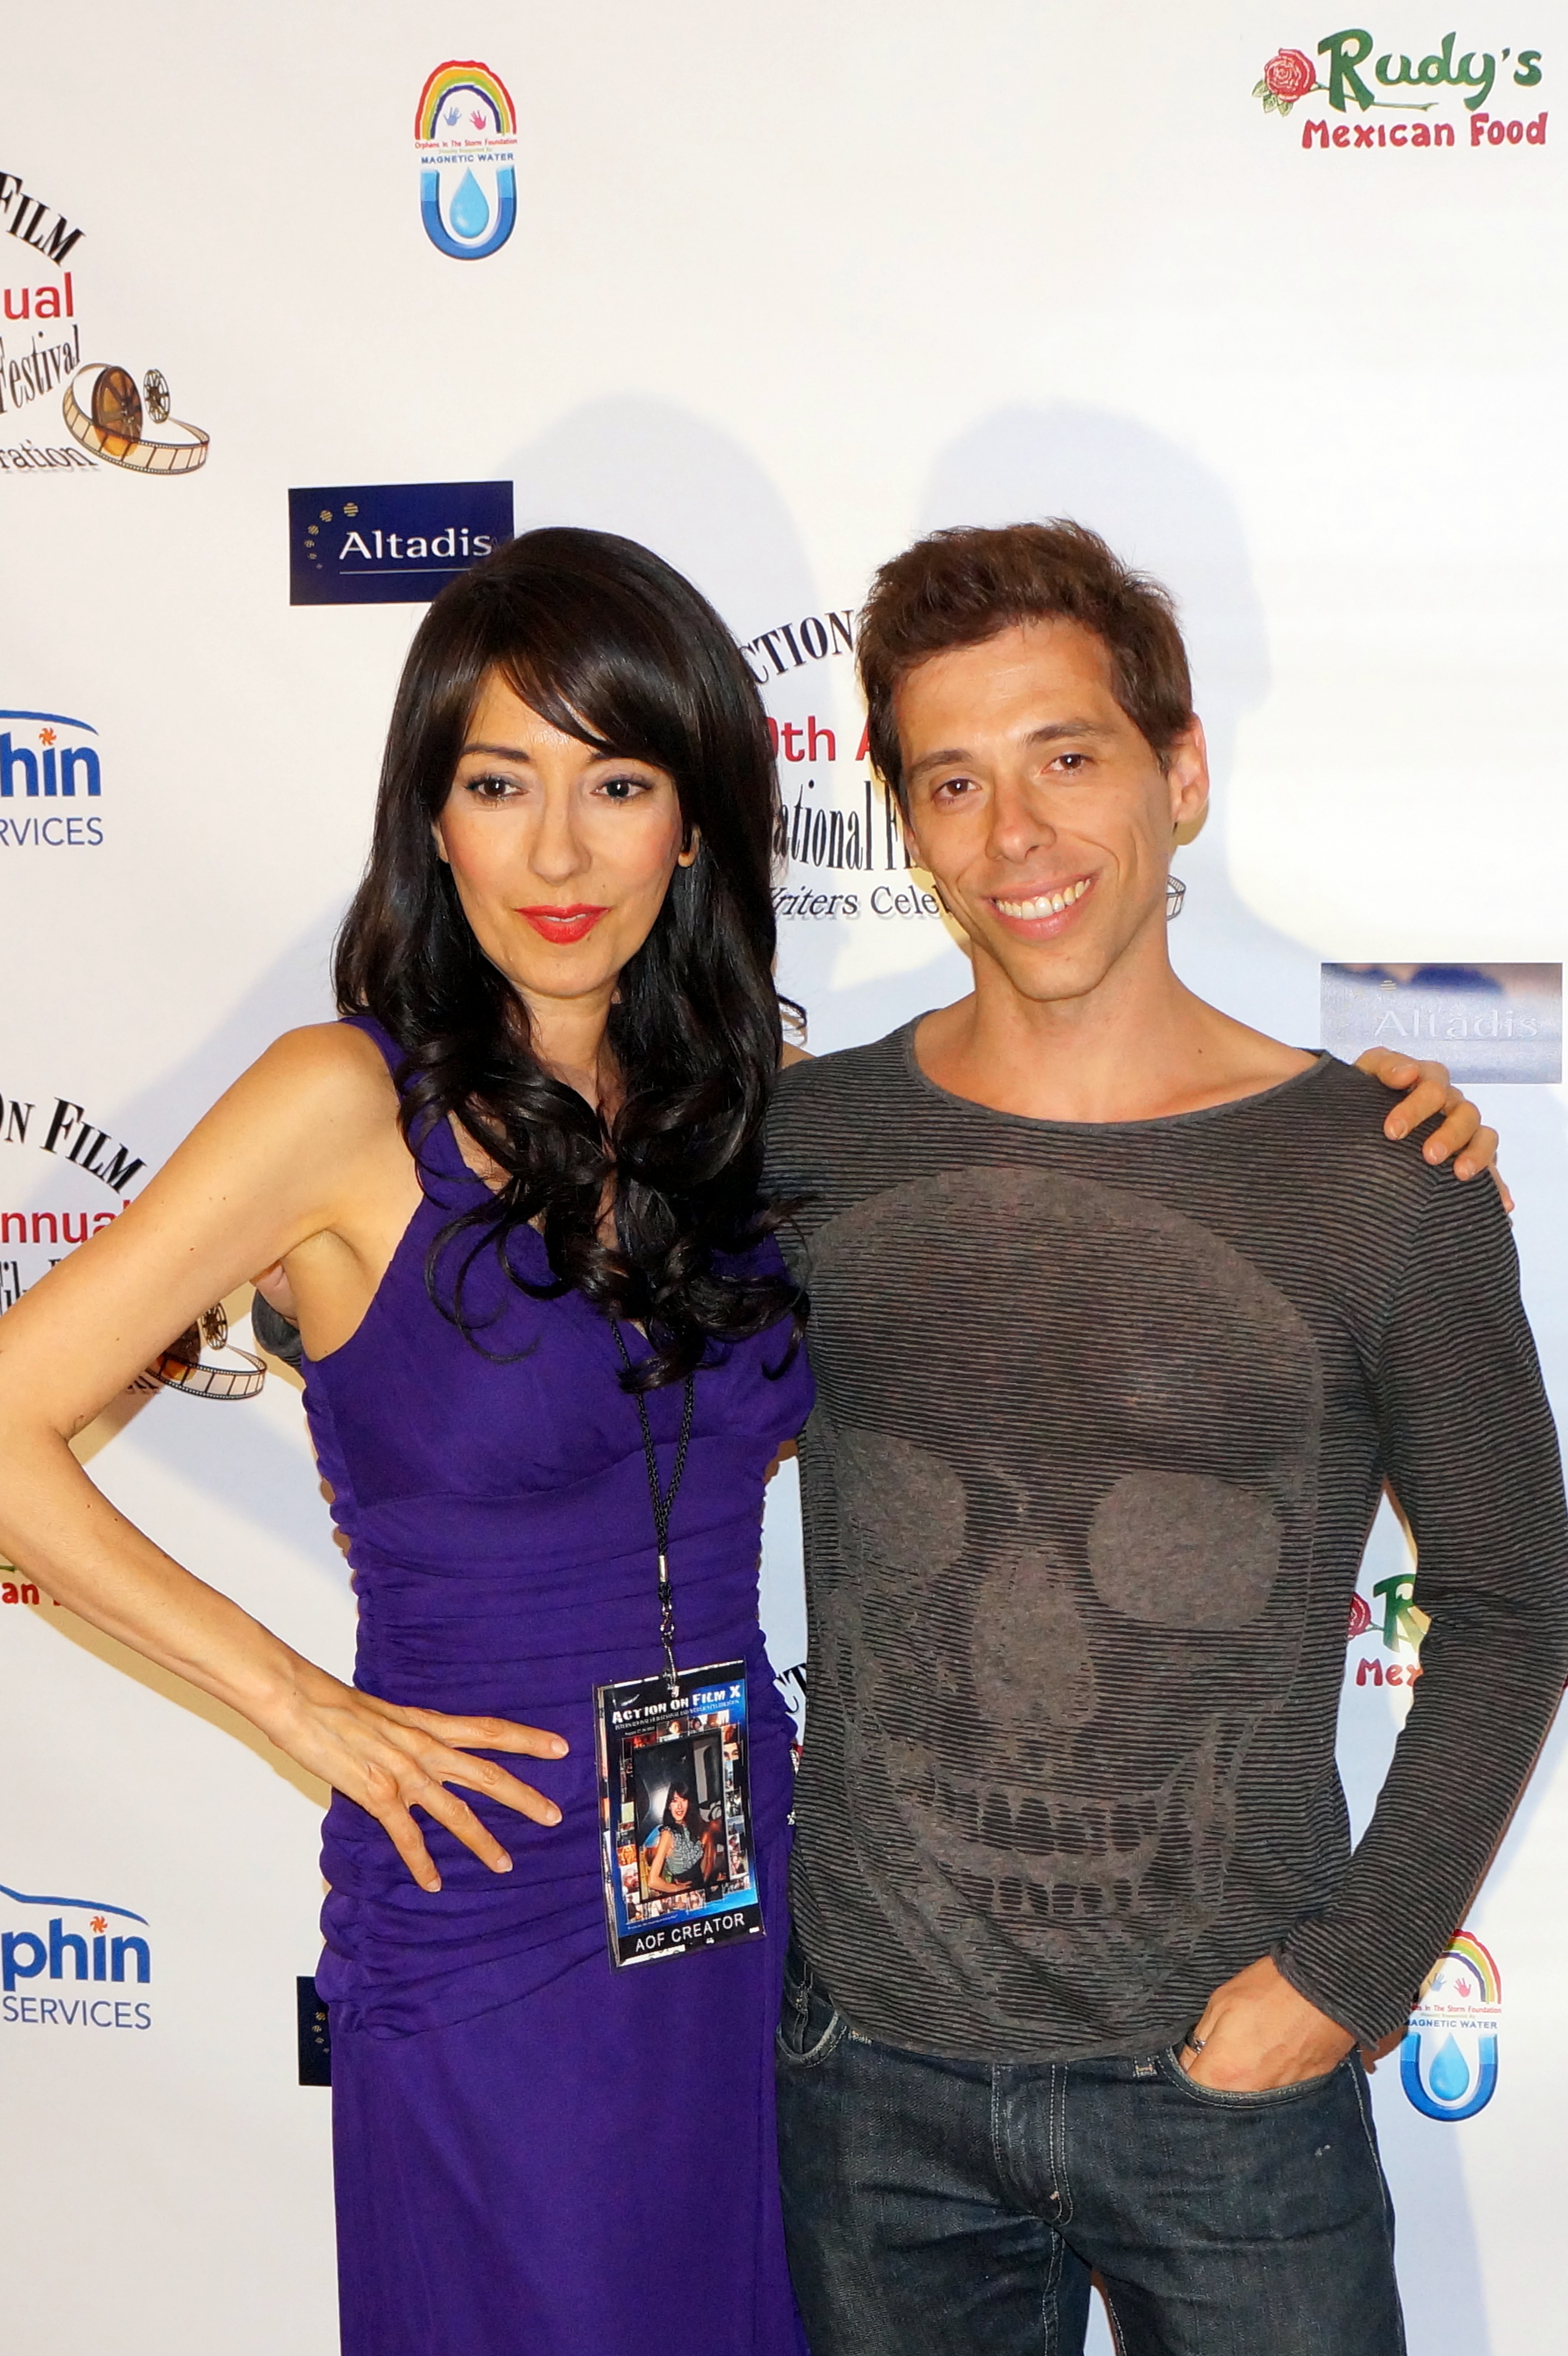 Luciana Lagana with actor Alex Montaldo at her official selections screenings at the Action on Film International Film Festival on 8/25/14